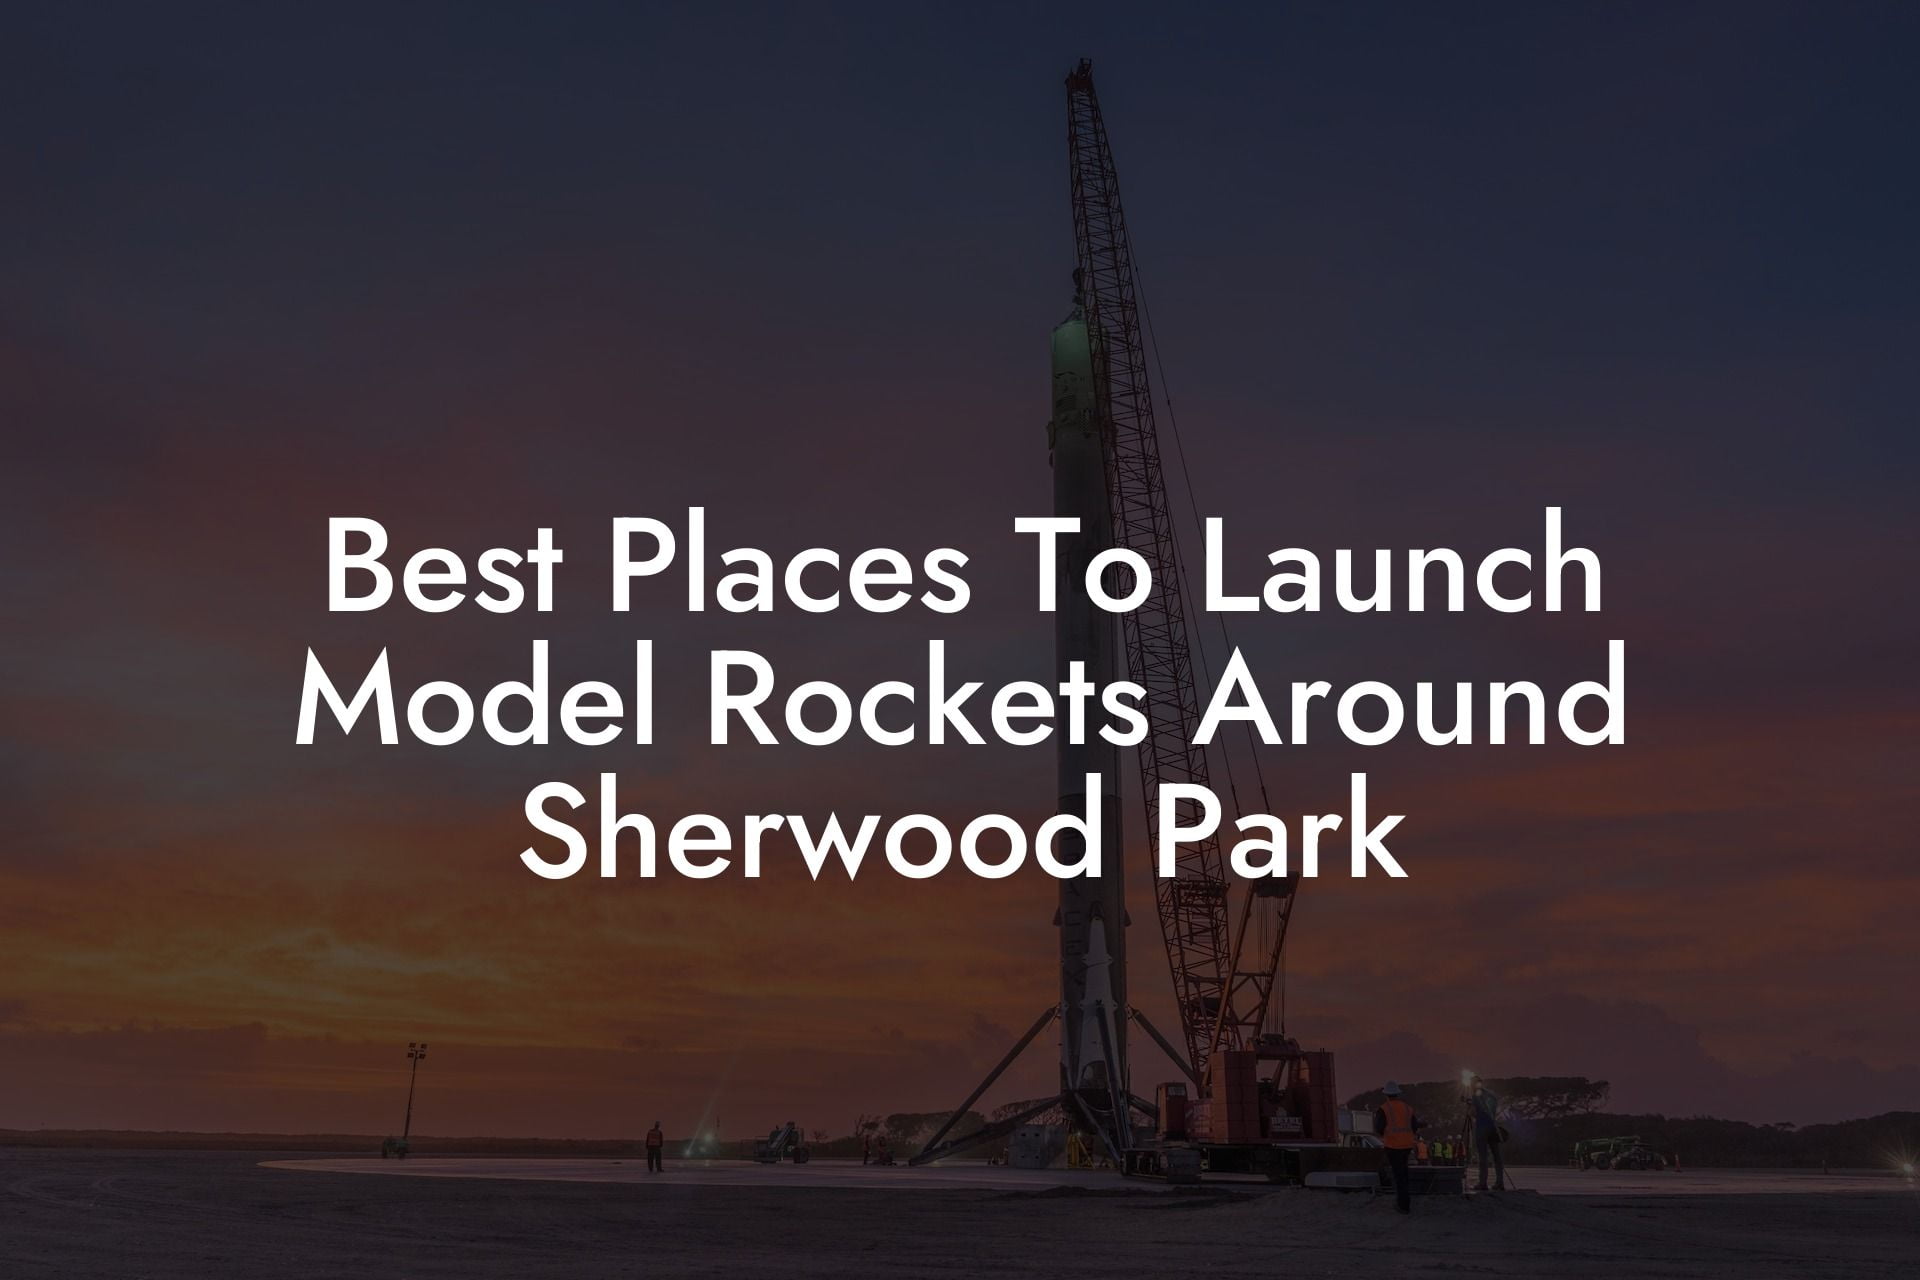 Best Places To Launch Model Rockets Around Sherwood Park